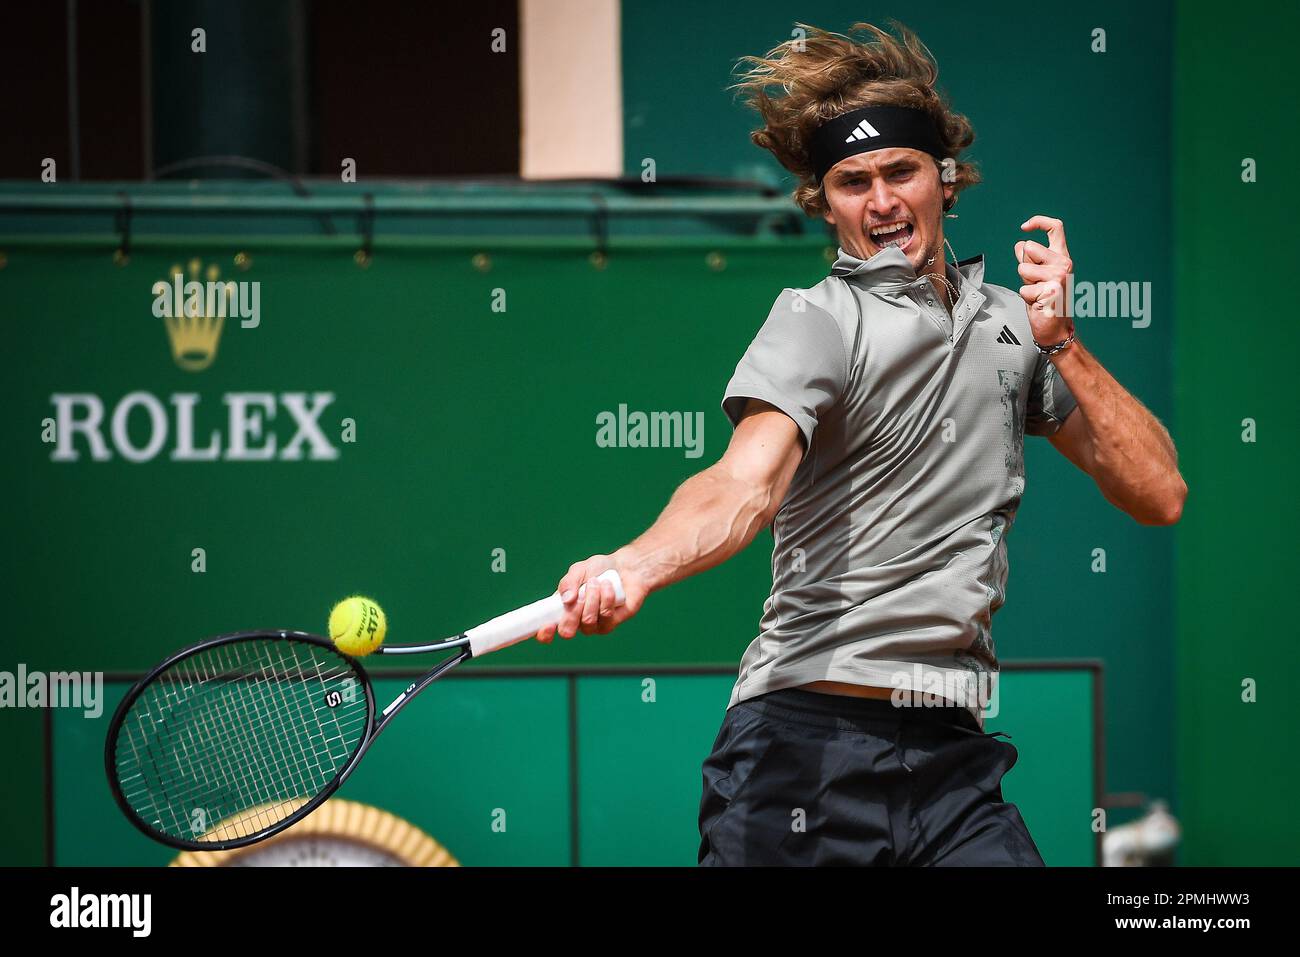 Alexander ZVEREV of Germany during the Rolex Monte-Carlo, ATP Masters 1000 tennis event on April